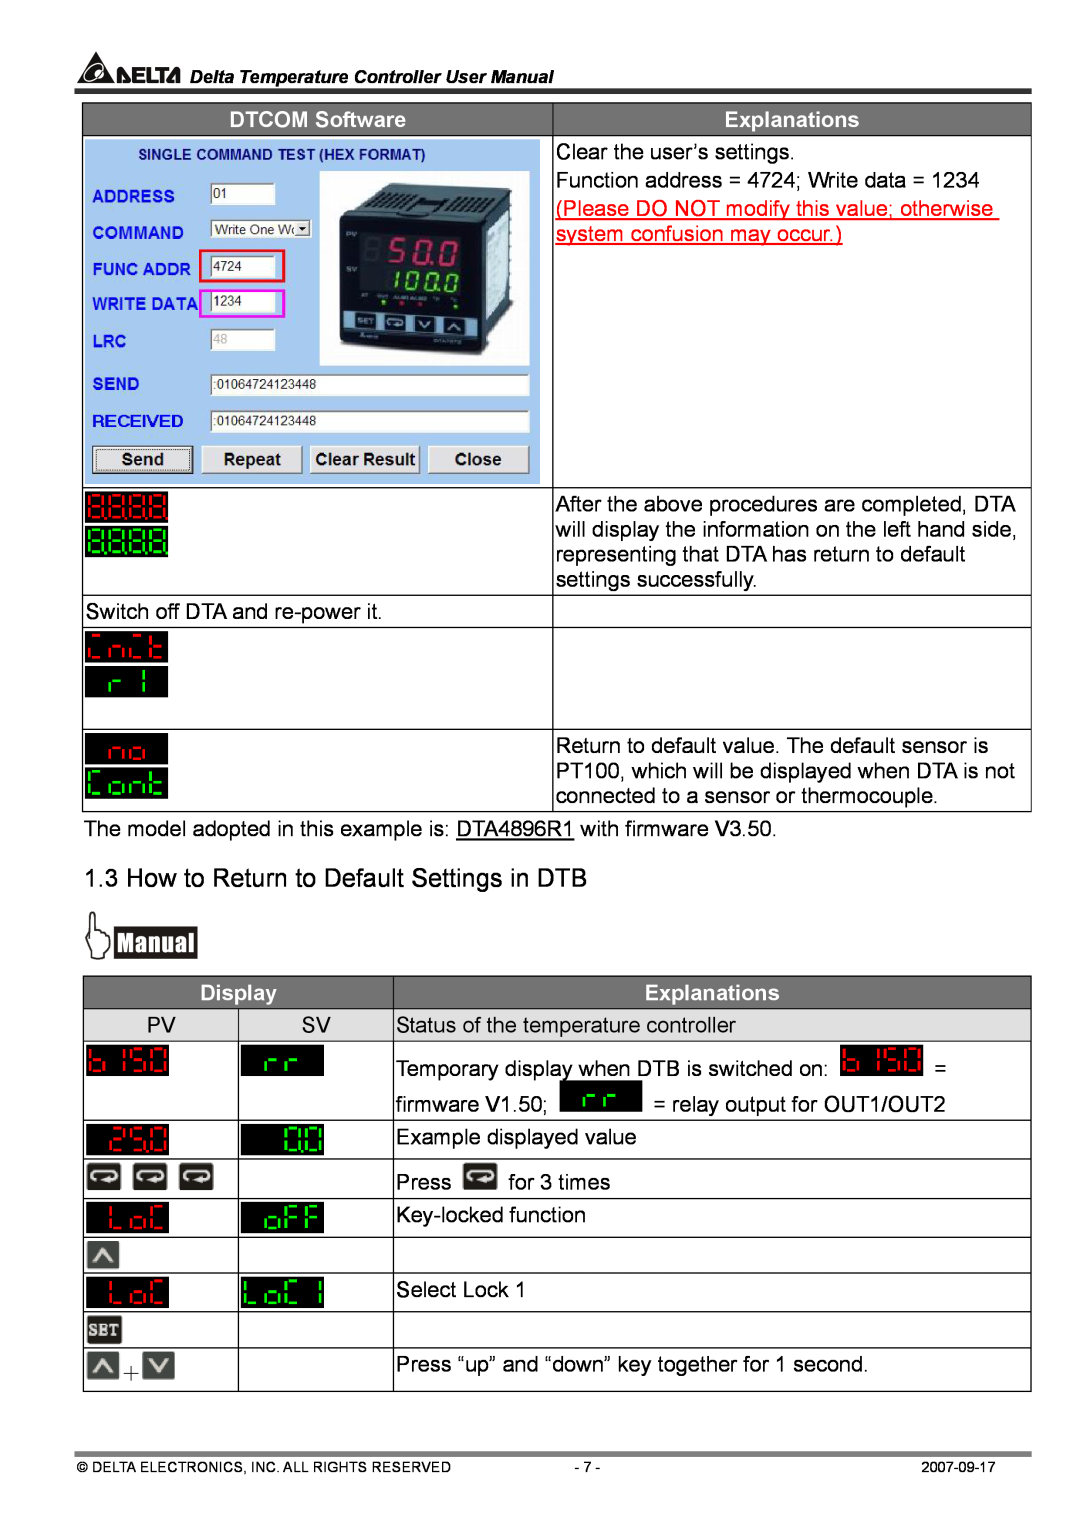 Delta Electronics DTA4896R1, DTC1000R How to Return to Default Settings in DTB, DTCOM Software, Explanations, Display 